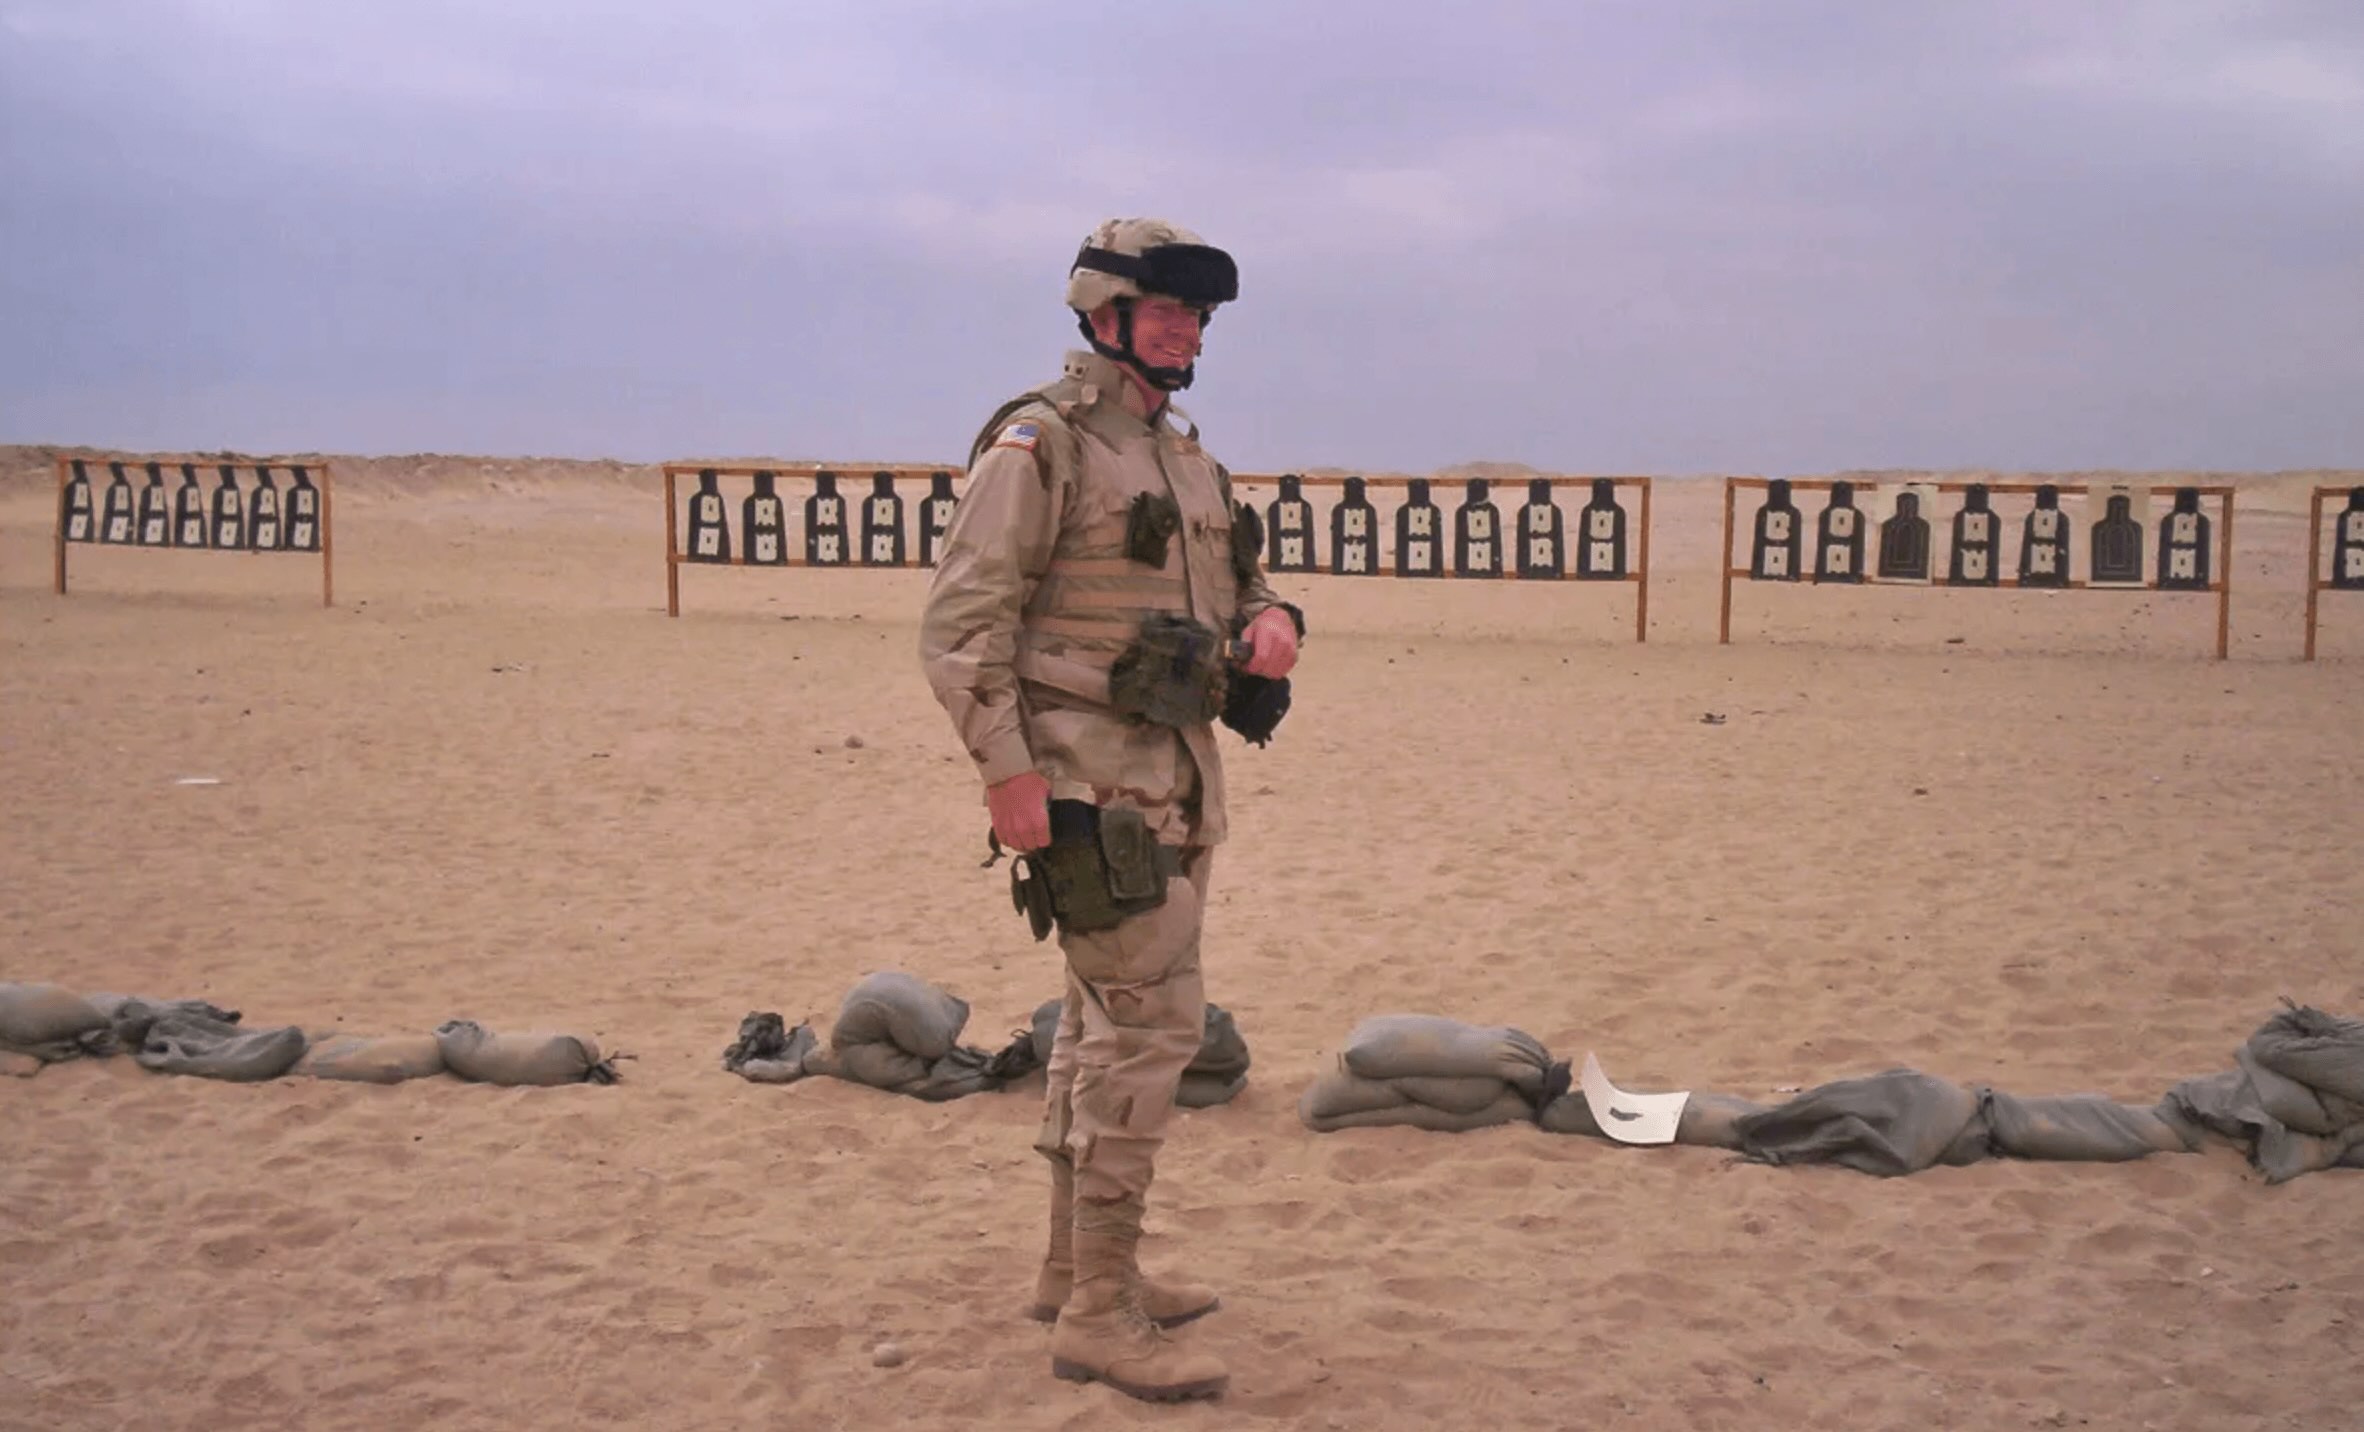 A soldier in camouflage gear participates in a Learning and Development exercise in a desert training area with shooting targets in the background.